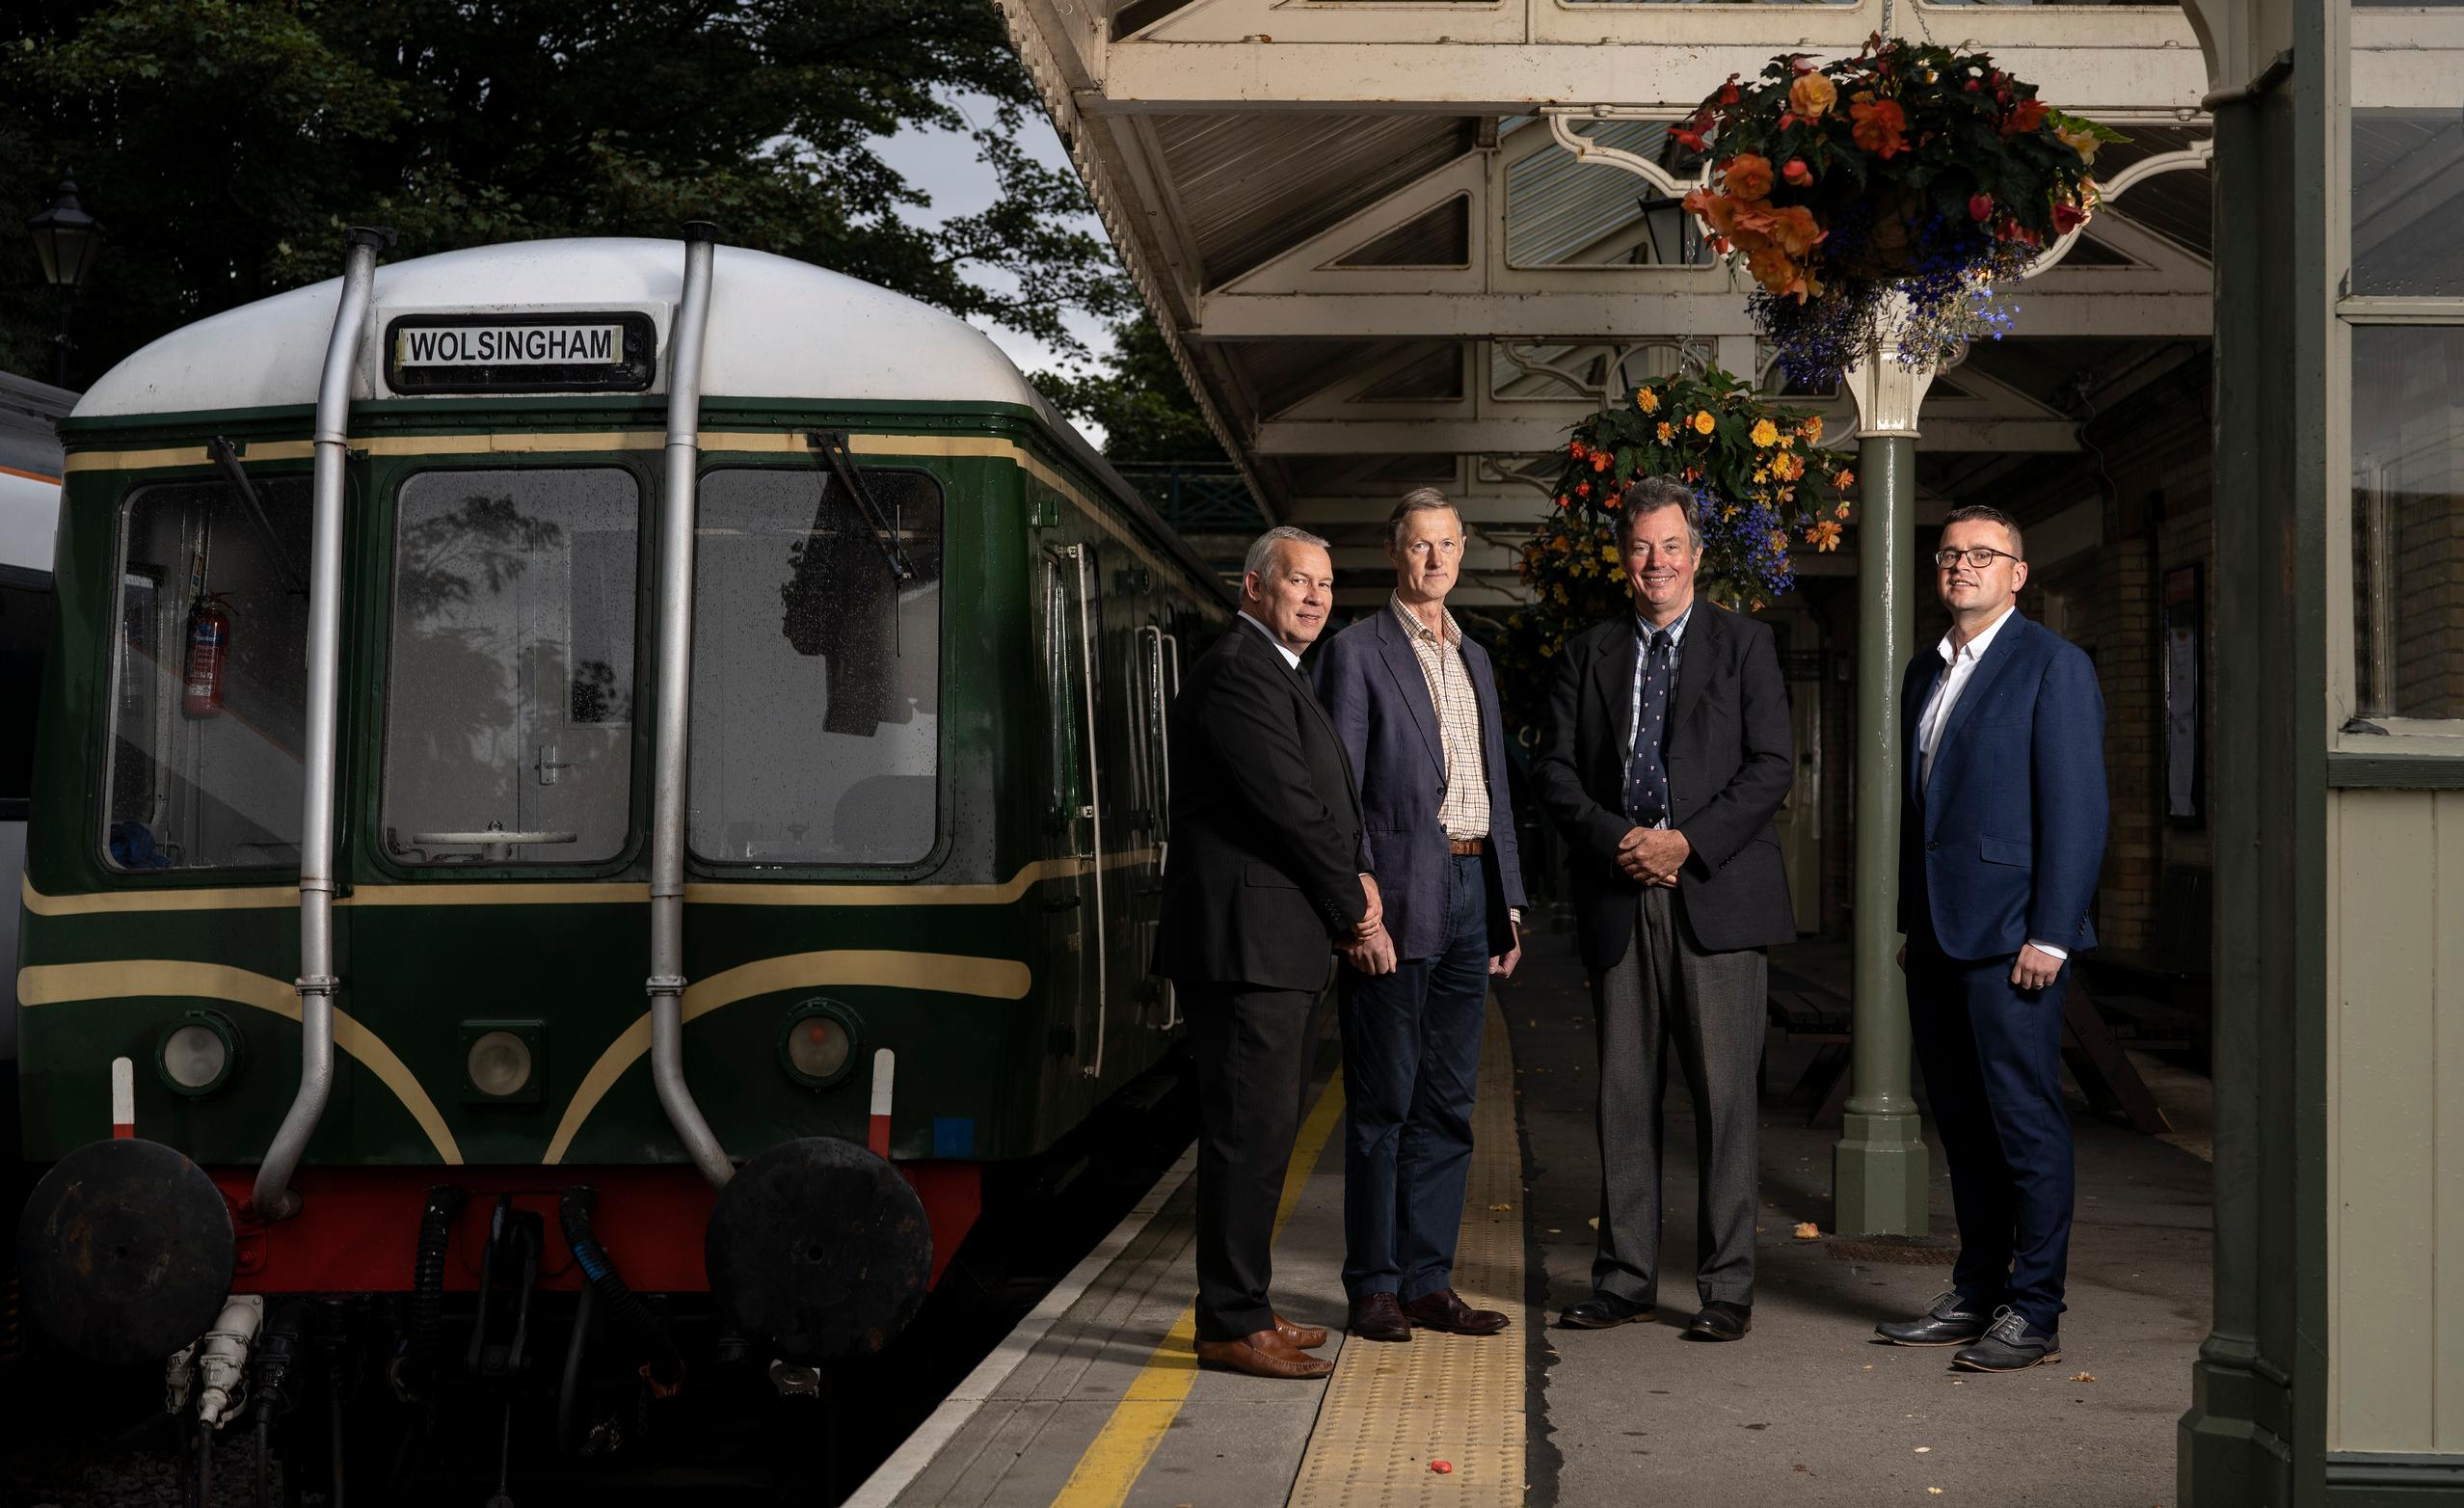 The Strategic Outline Business Case team at Stanhope station on the proposed Darlington to Weardale line. The train belongs to the Weardale Railway Trust, run by volunteers